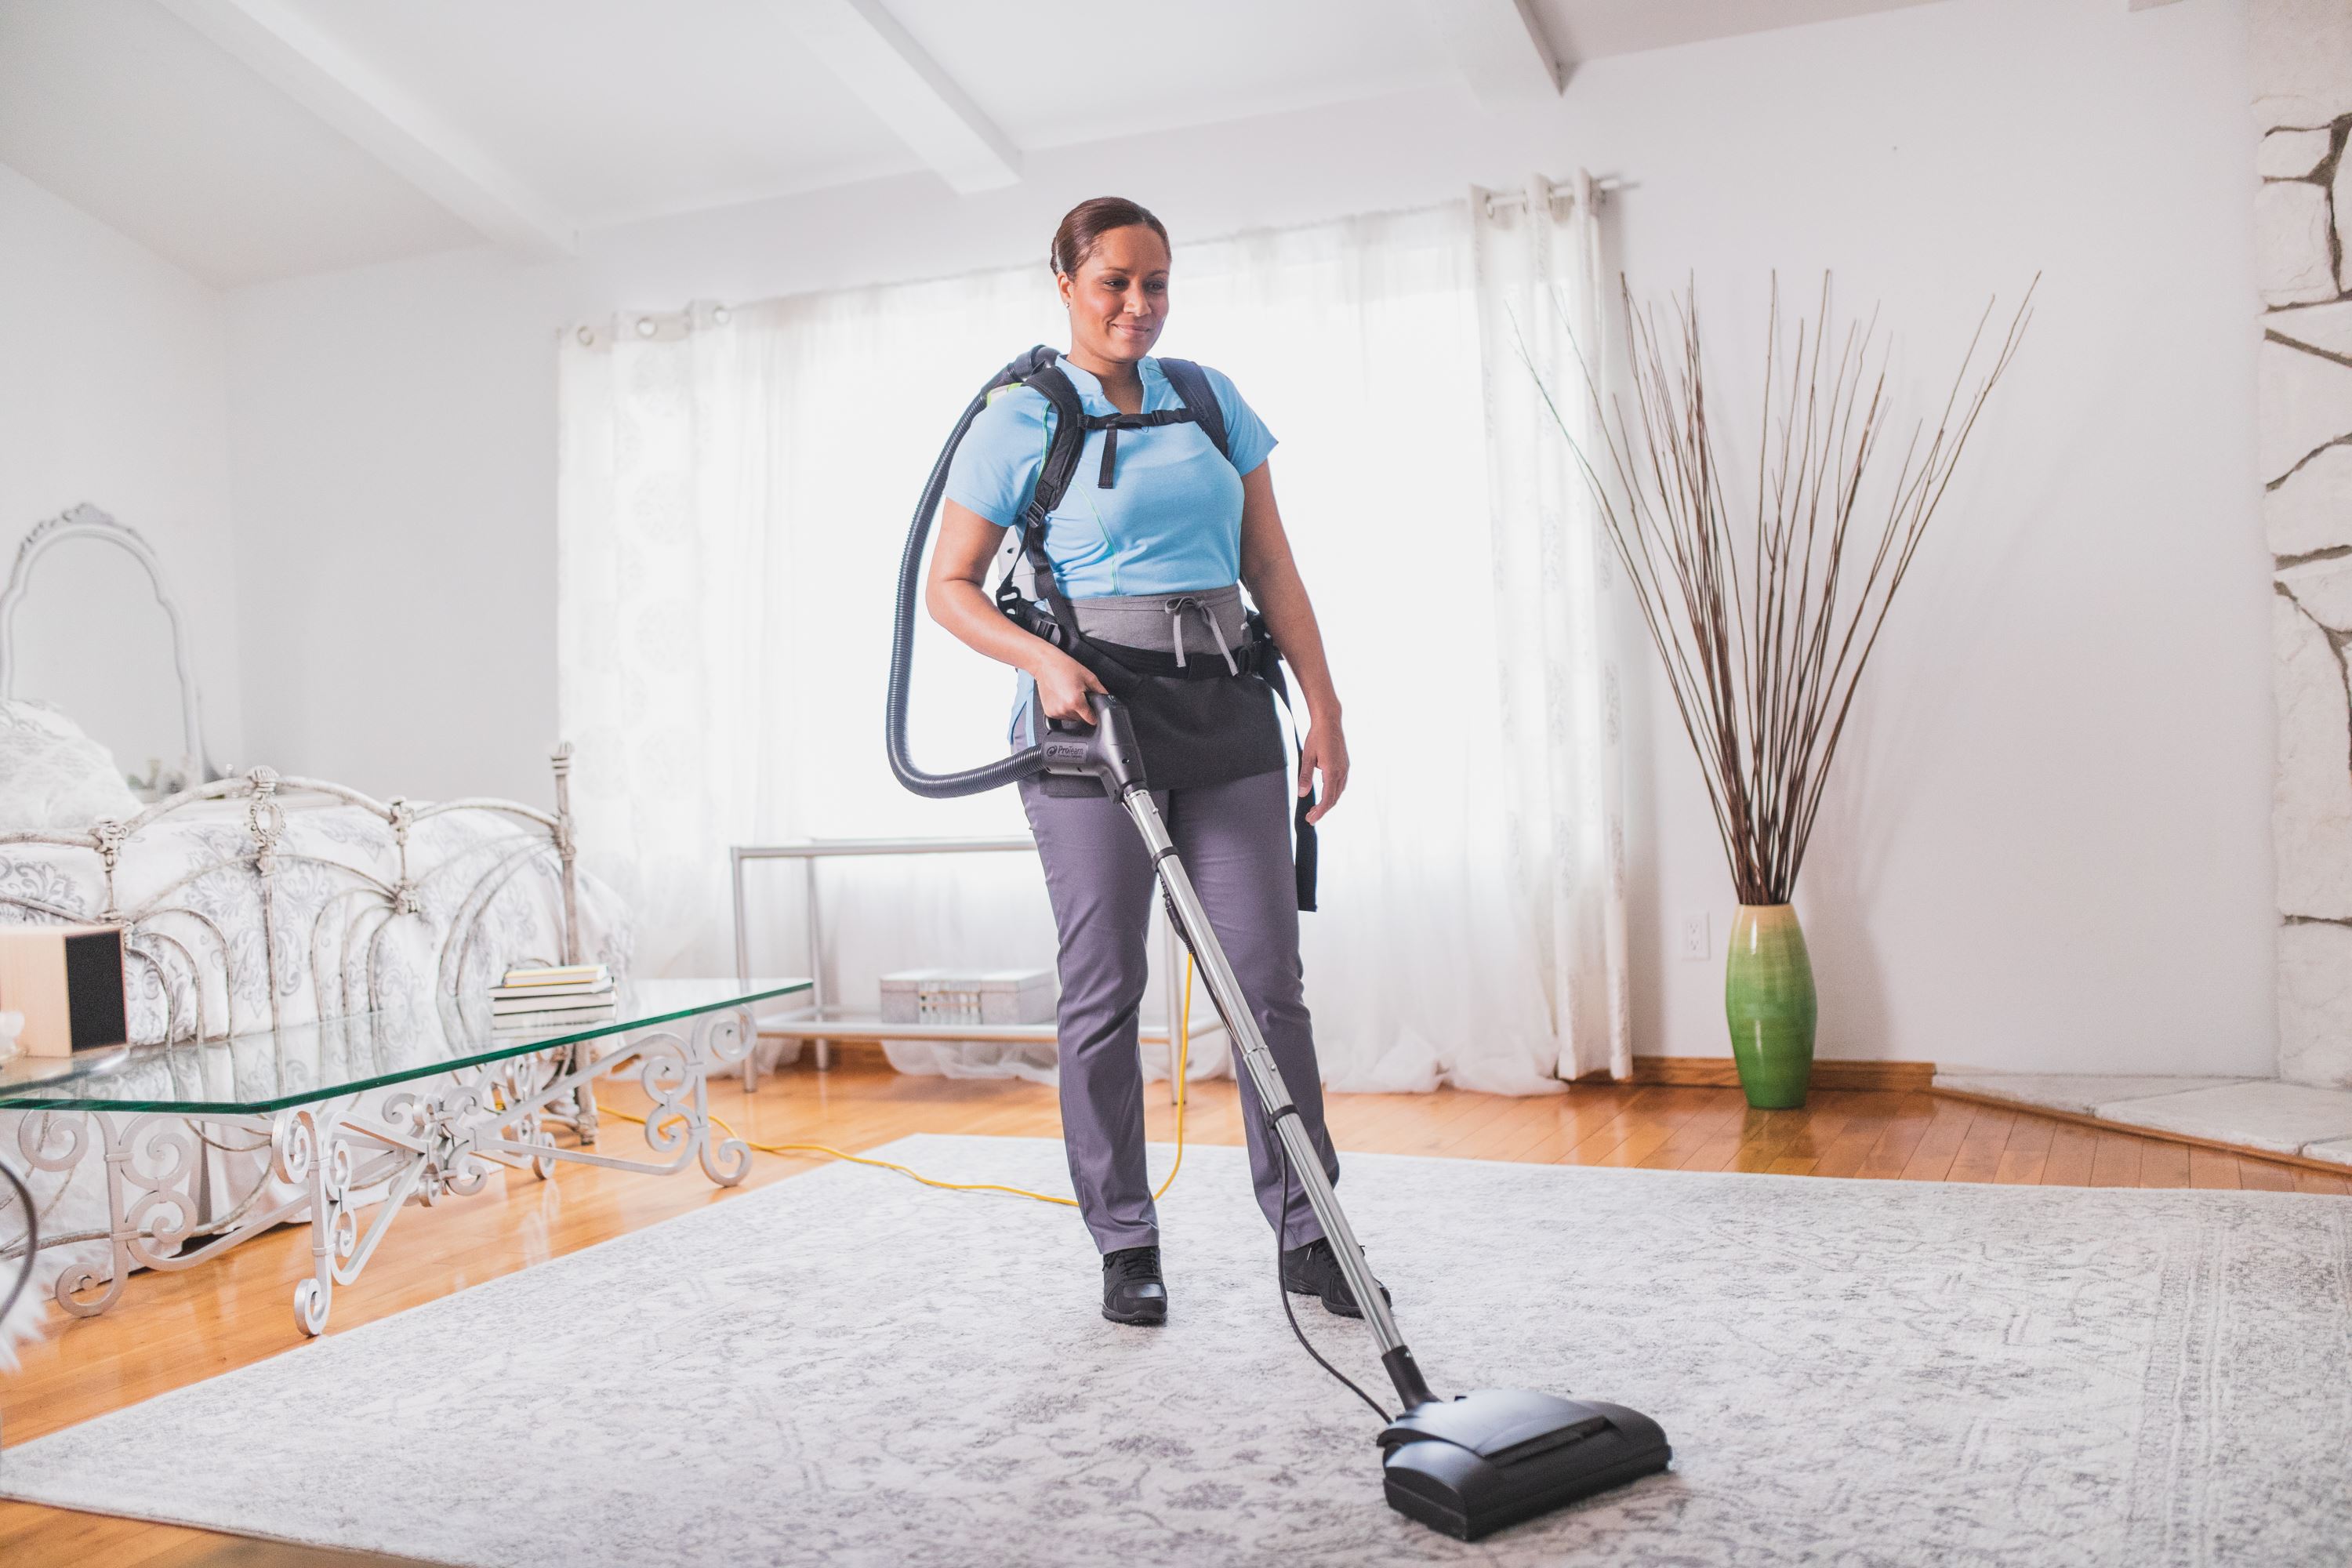 Deep house cleaning services include floor cleaning